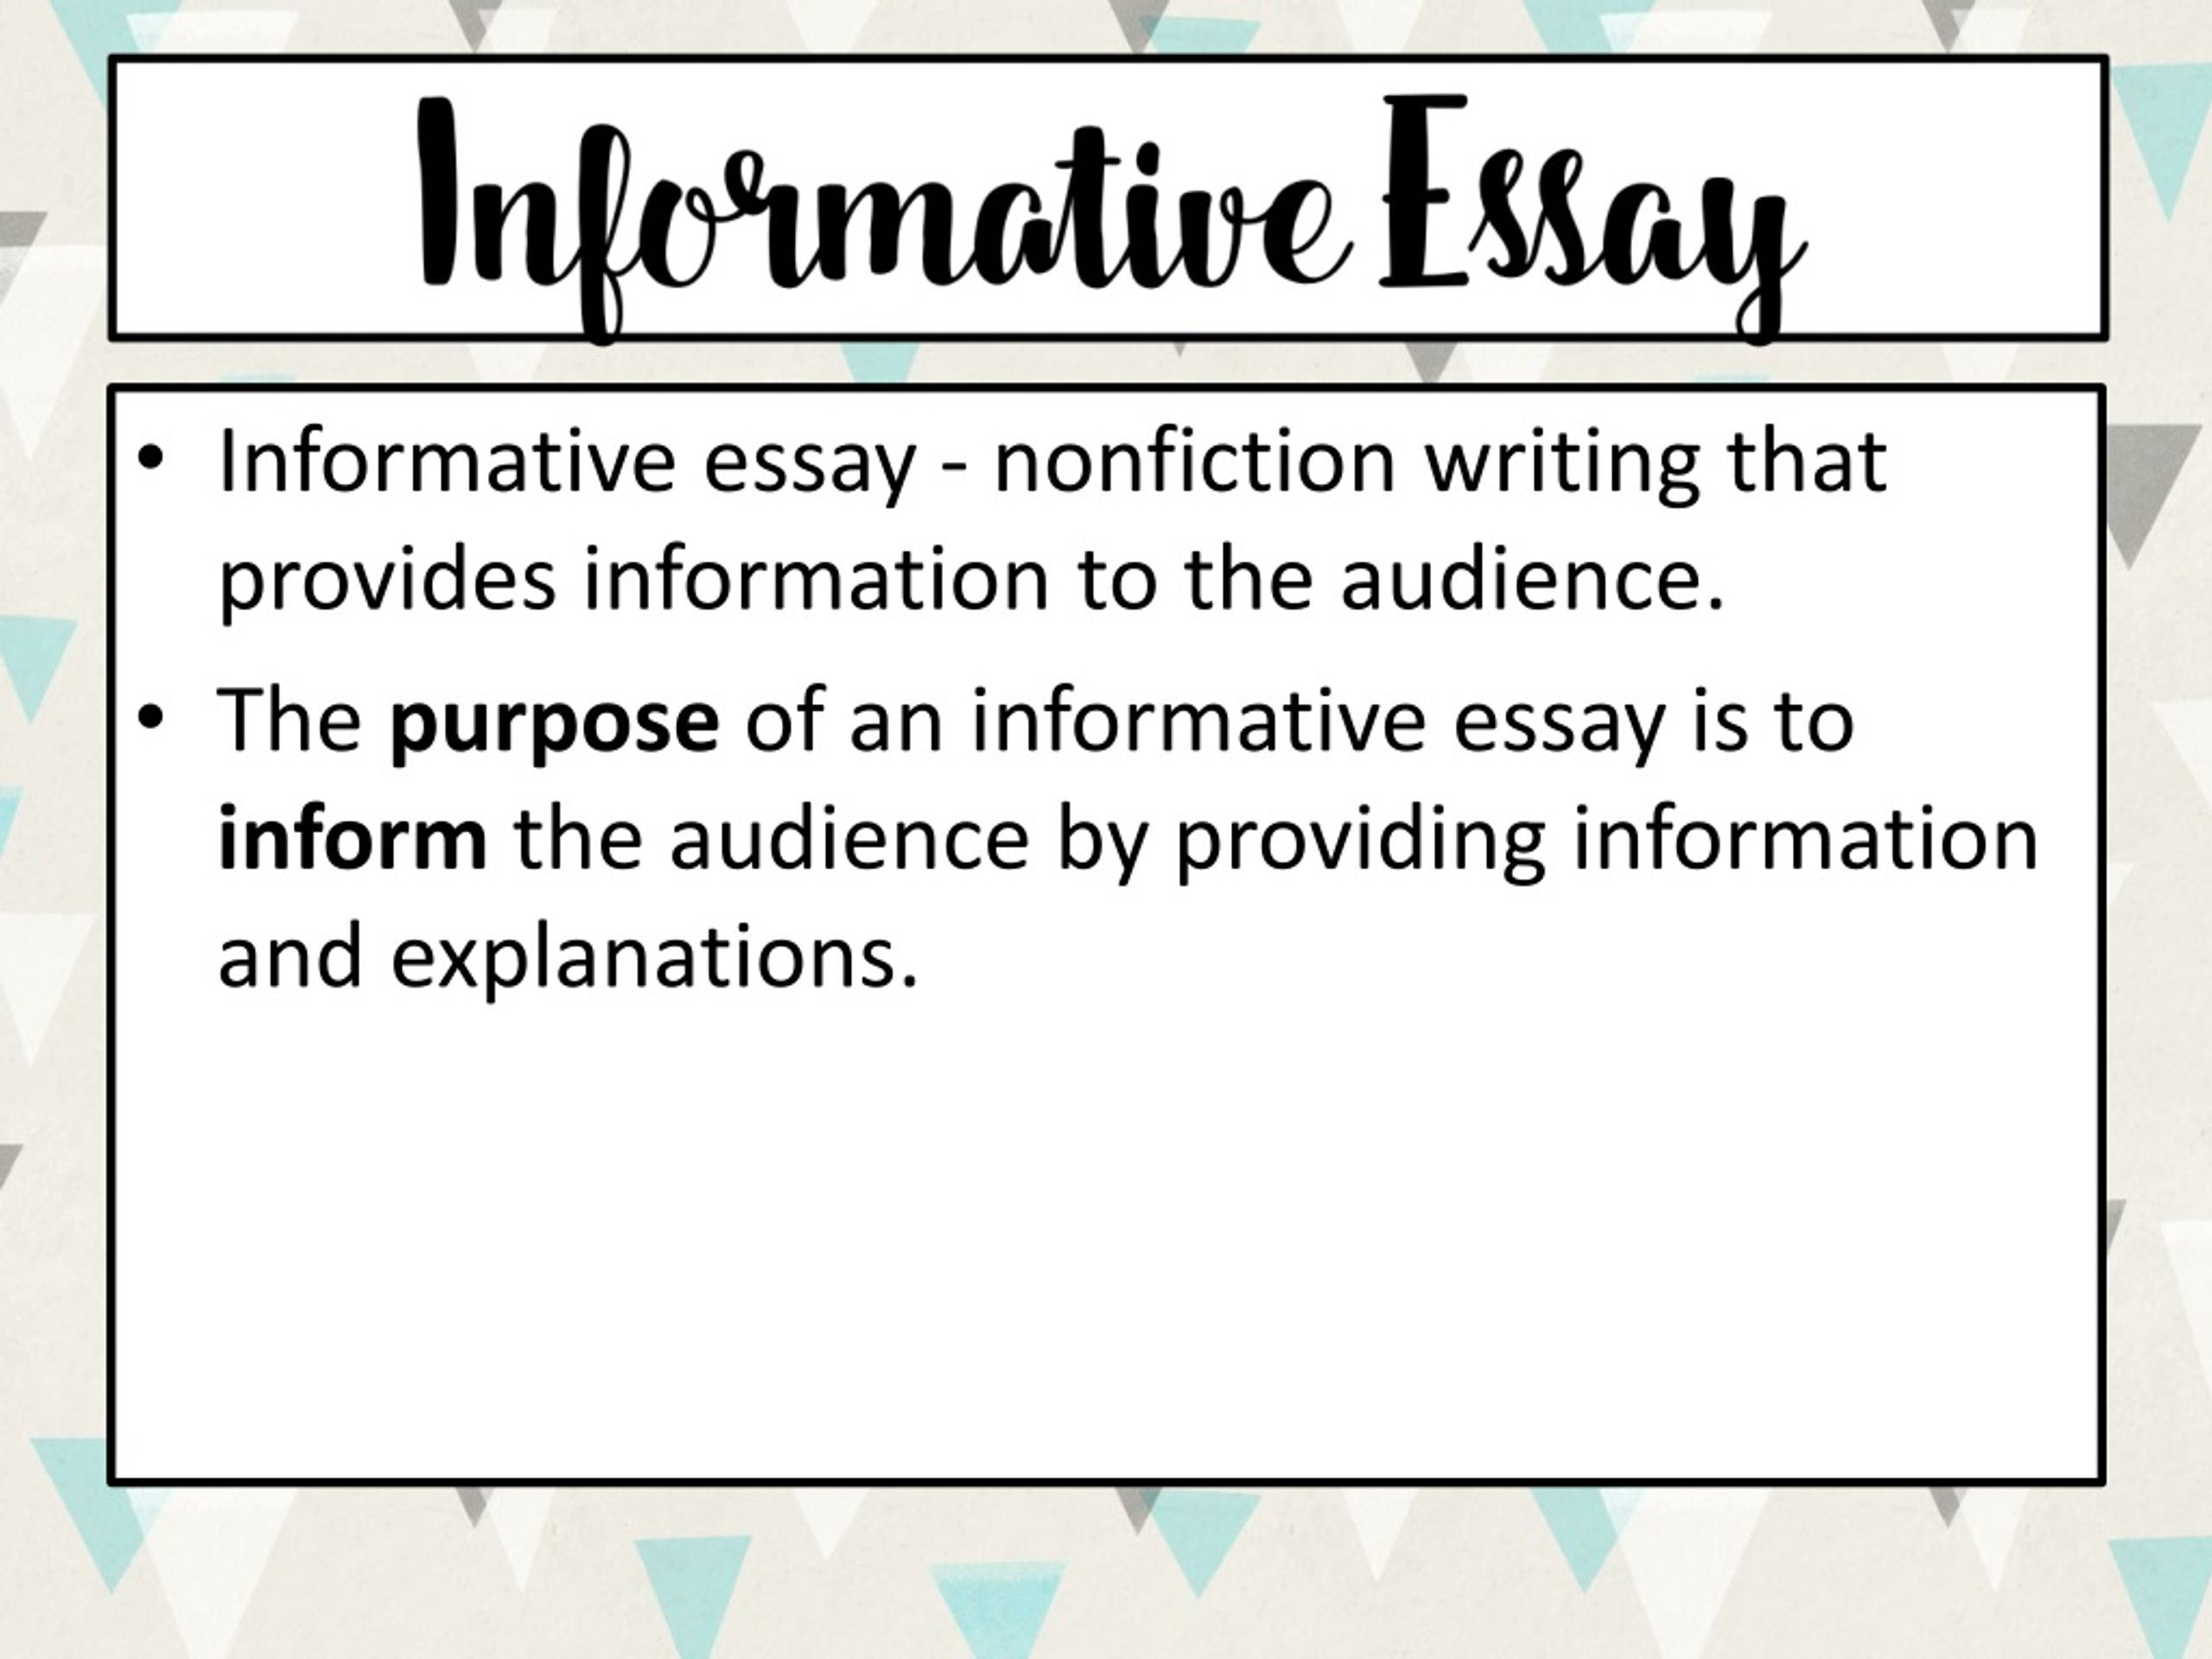 a nonfiction essay that analyzes and evaluates a text